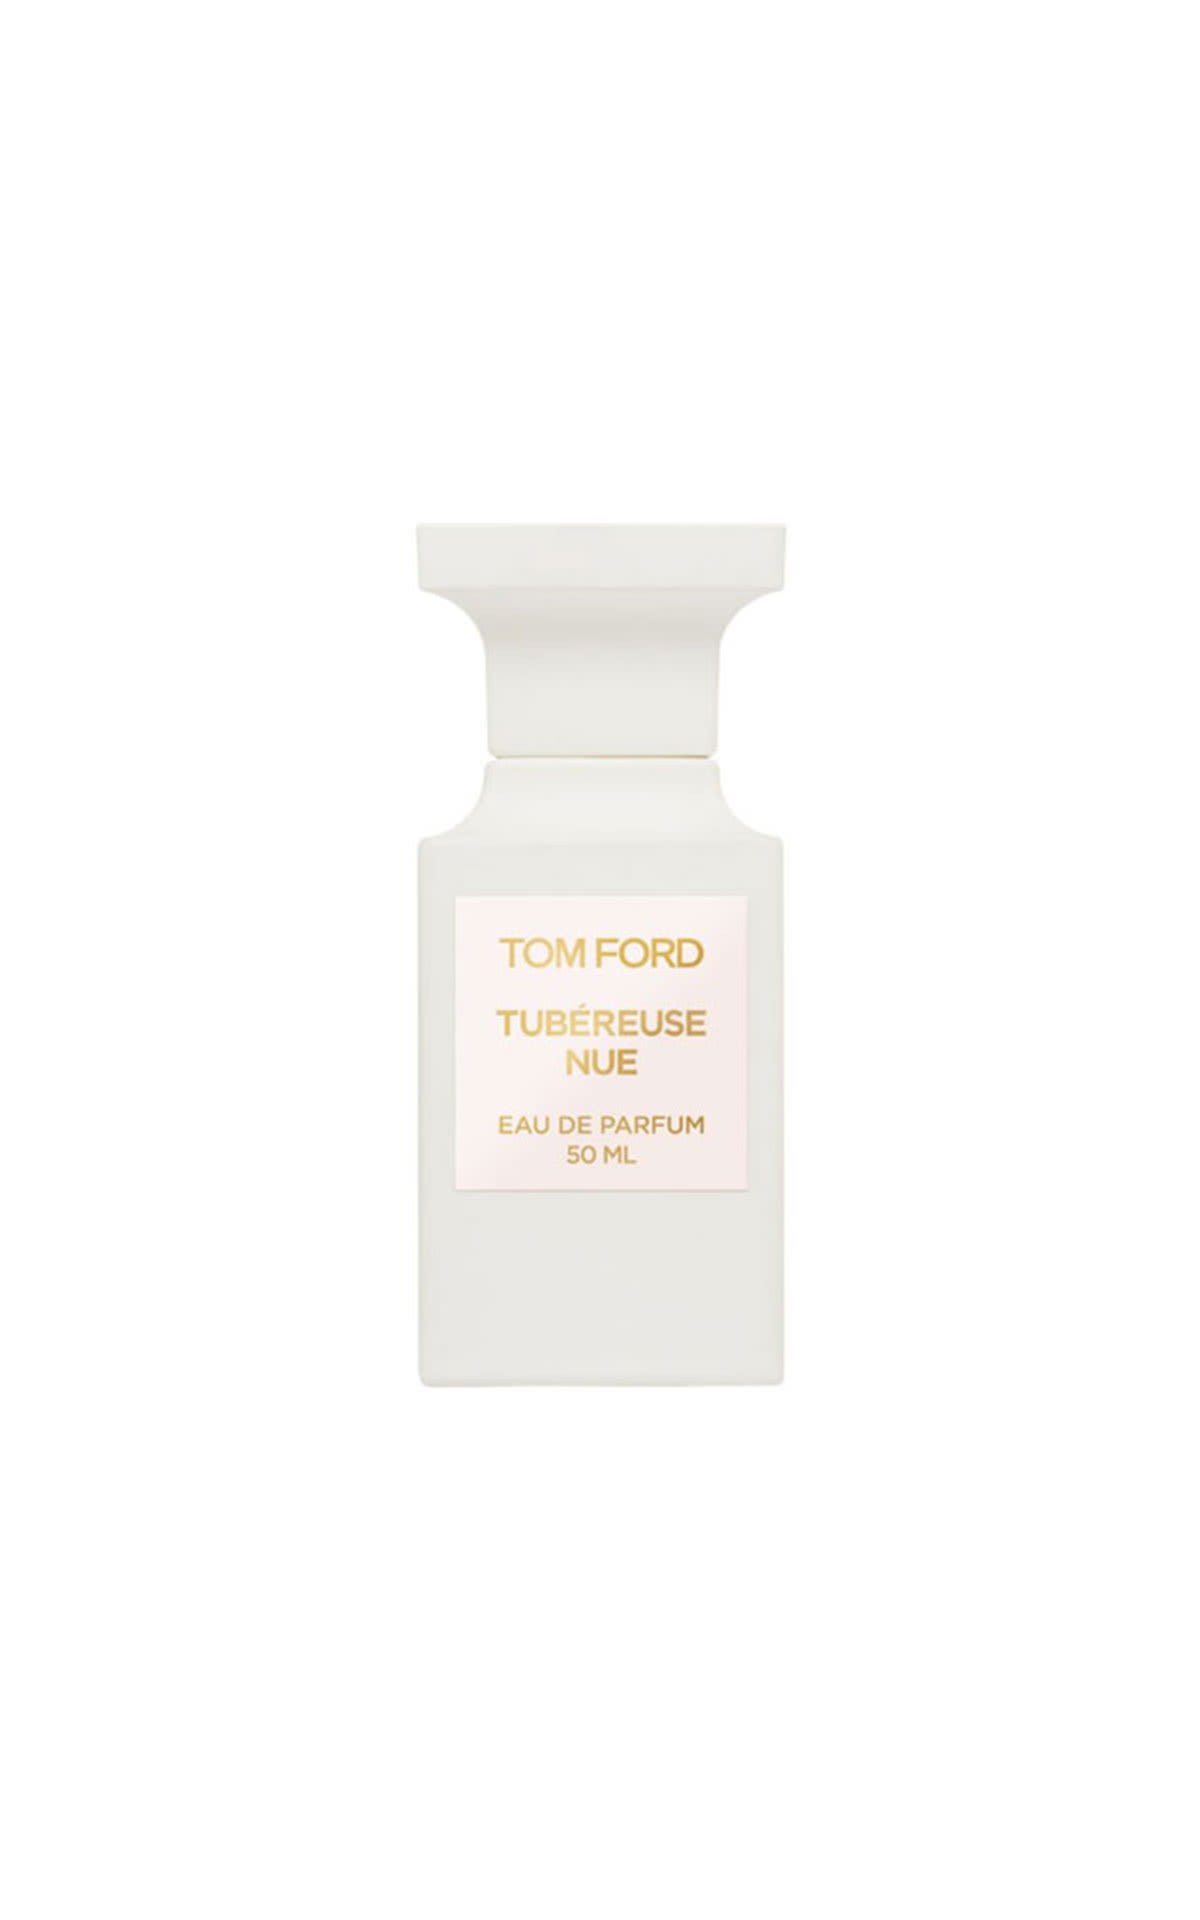 The Cosmetics Company Store Tom Ford Tubereuse nue eau de parfum 50ml from Bicester Village